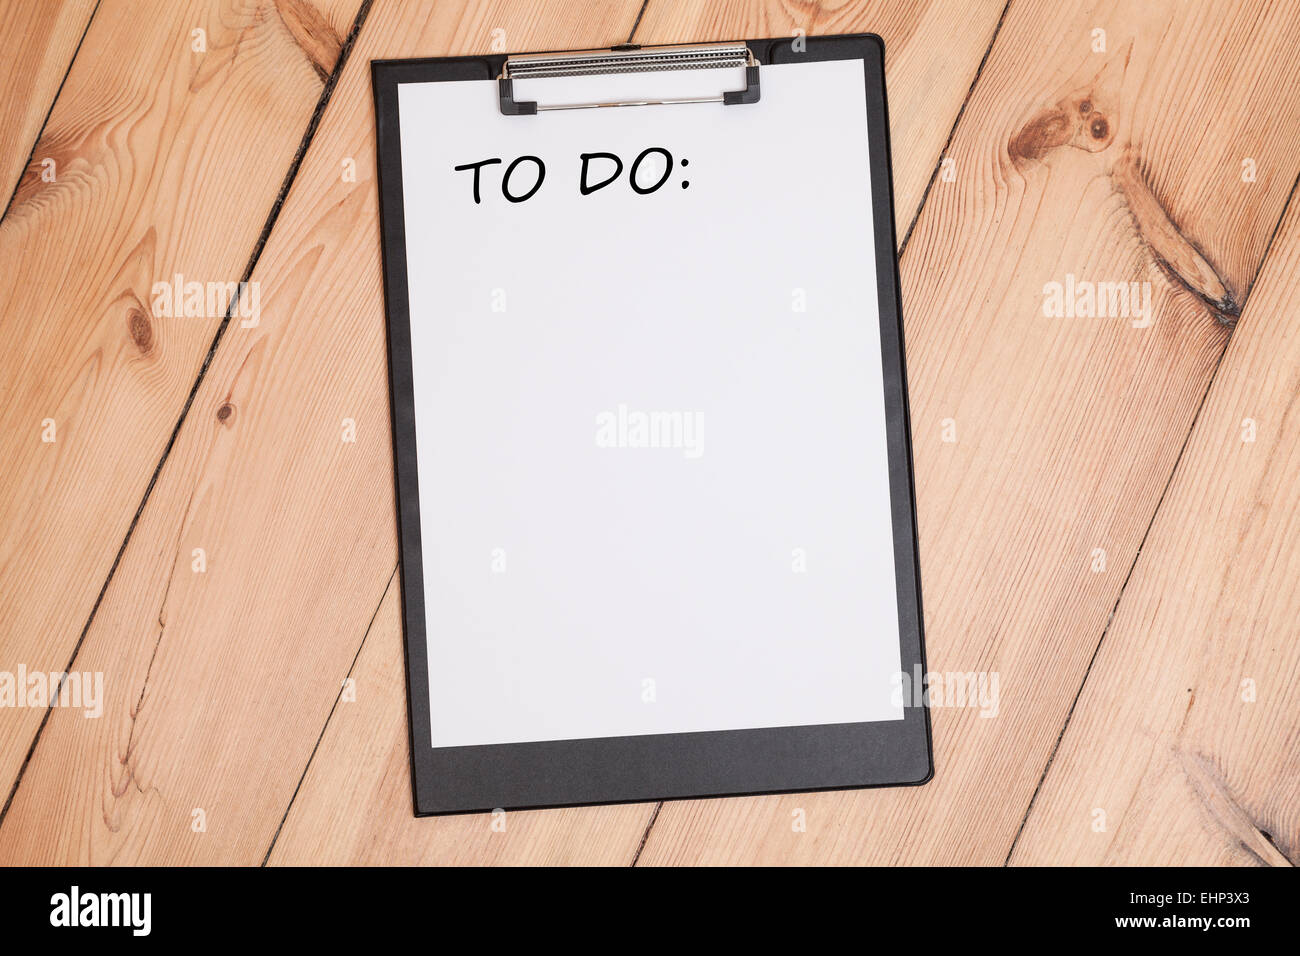 to do written on a clipboard Stock Photo